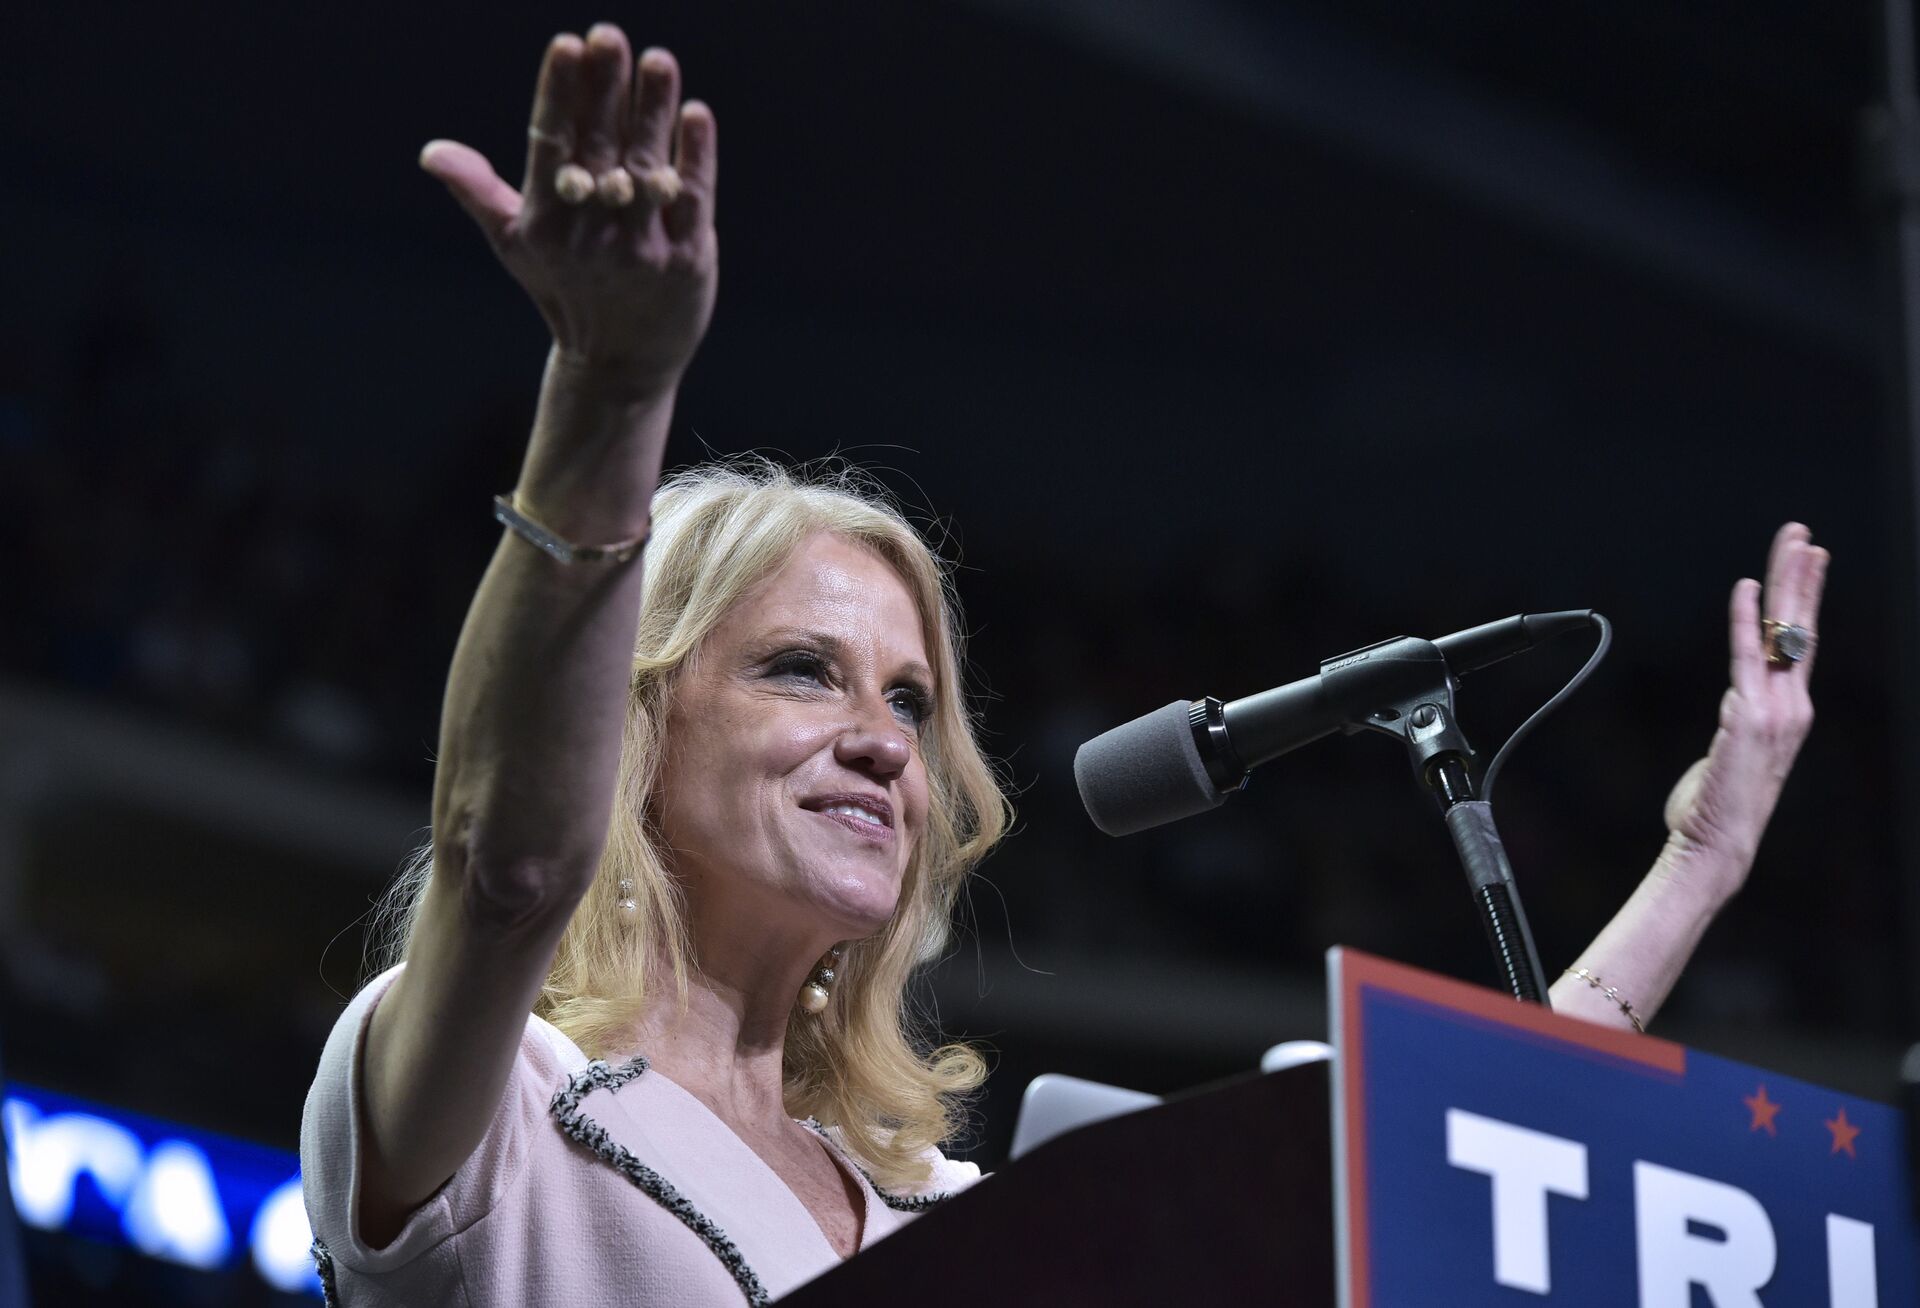 Trump campaign manager Kellyanne Conway speaks at a rally for Republican presidential nominee Donald Trump at the Giant Center in Hershey, Pennsylvania on November 4, 2016 - Sputnik International, 1920, 23.05.2022